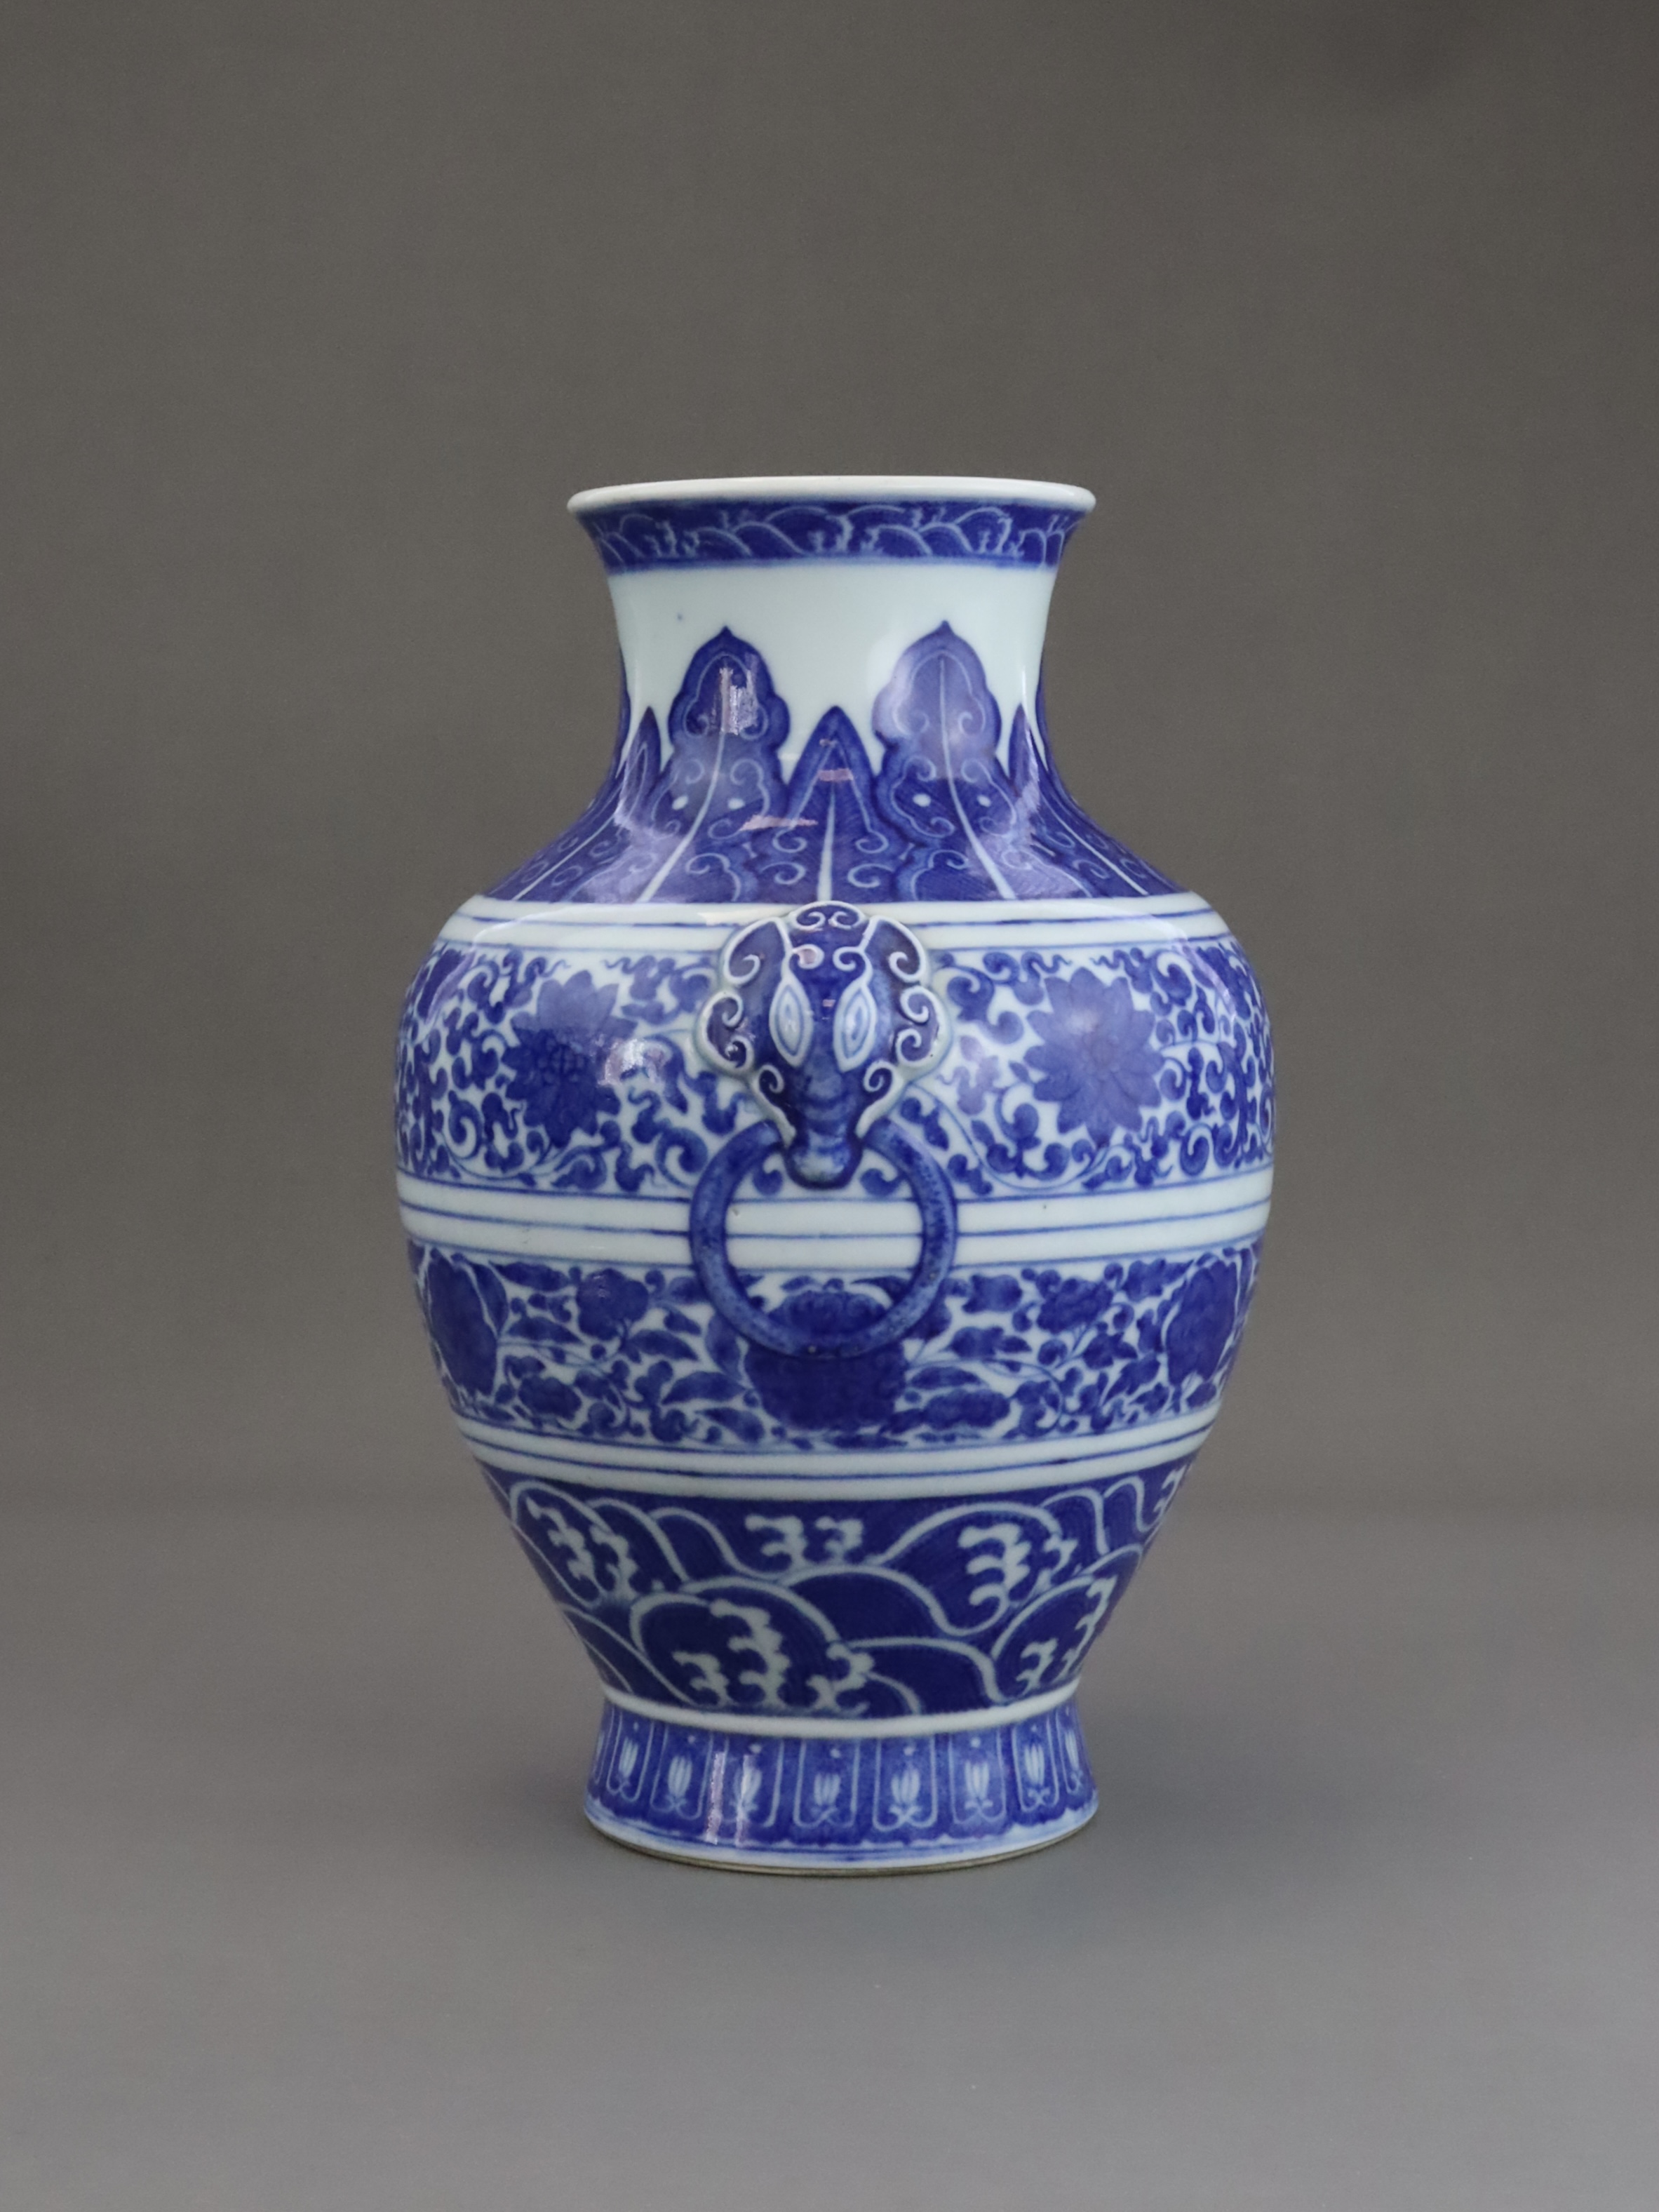 A Good Blue and White Ming style Vase, hu, six character seal mark of Qianlong, Qing dynasty, - Image 5 of 9